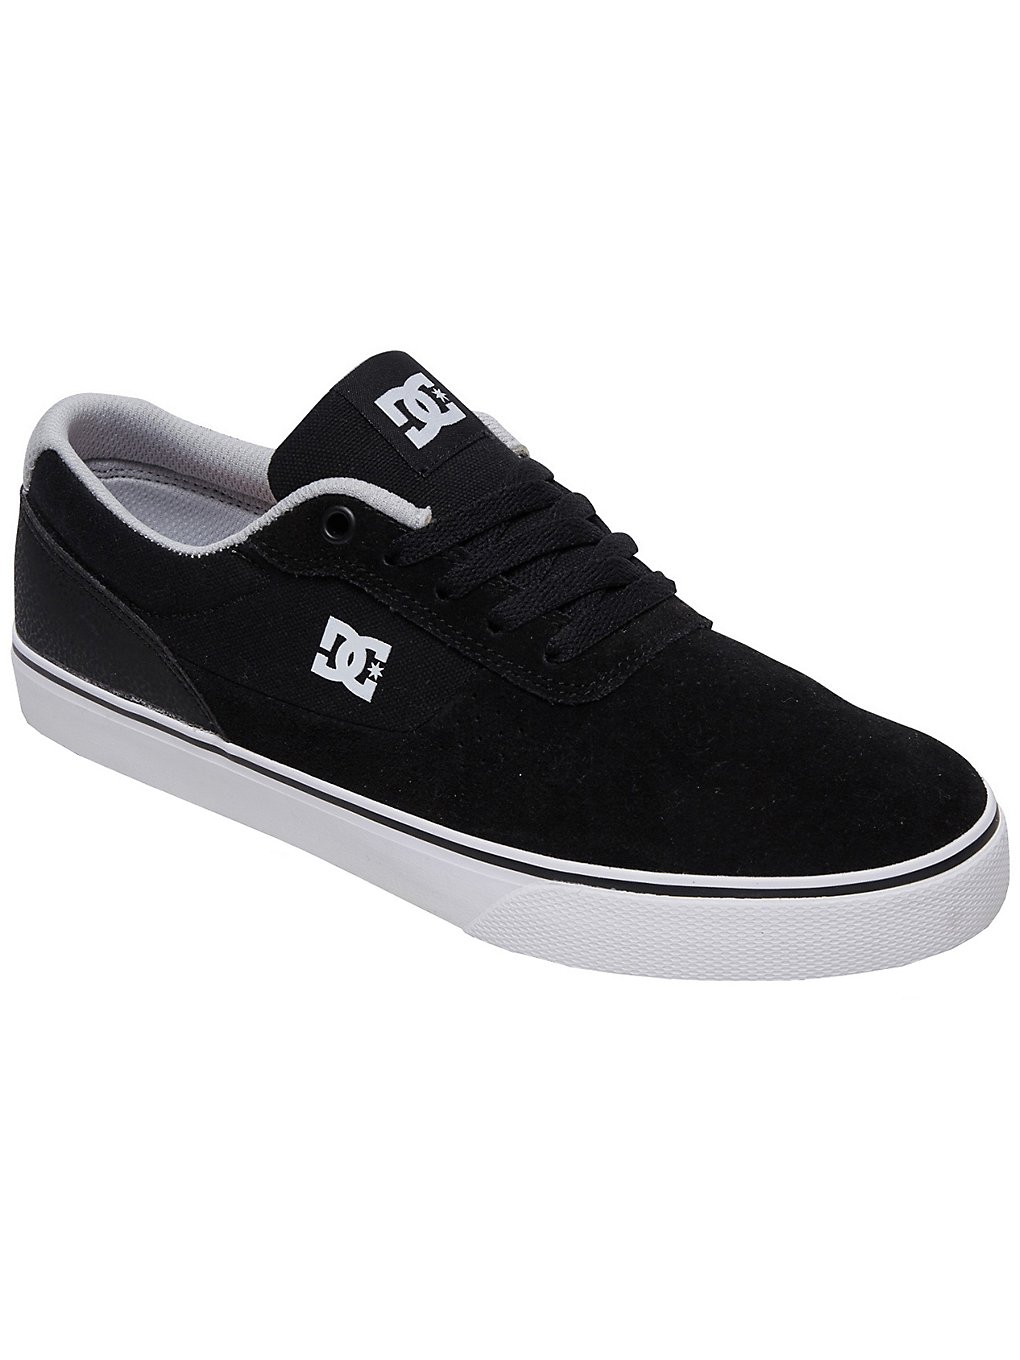 Dc switch sneakers musta, dc